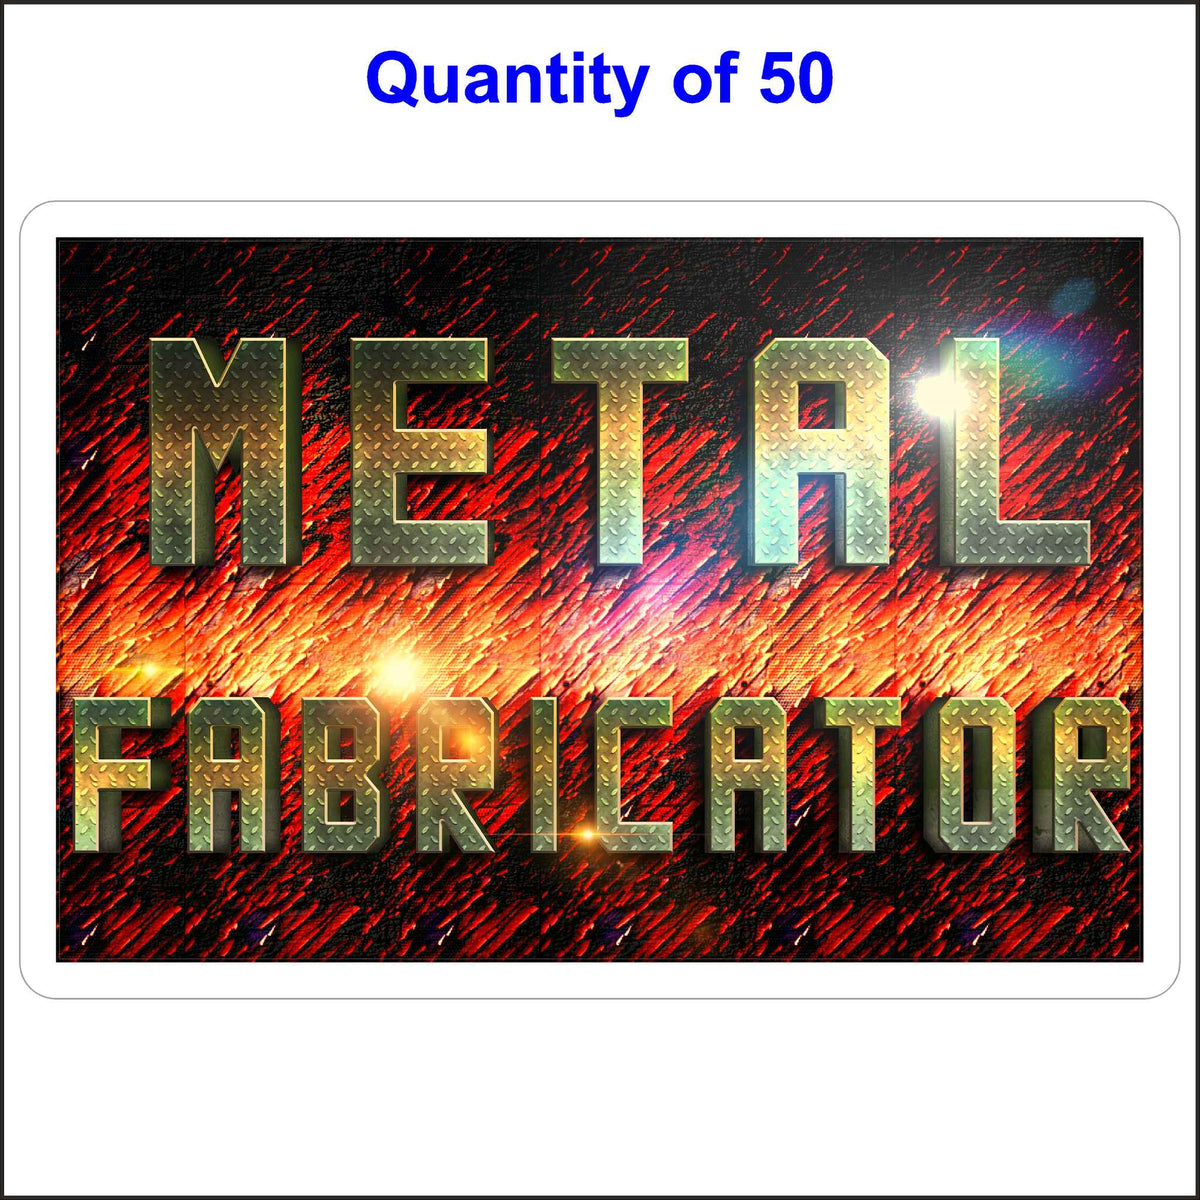 50 Quantity of This Metal Fabricator Sticker. Printed in Full Color and Shows the Text on a Diamond Plate and the Background in Colorful Etched Metal.